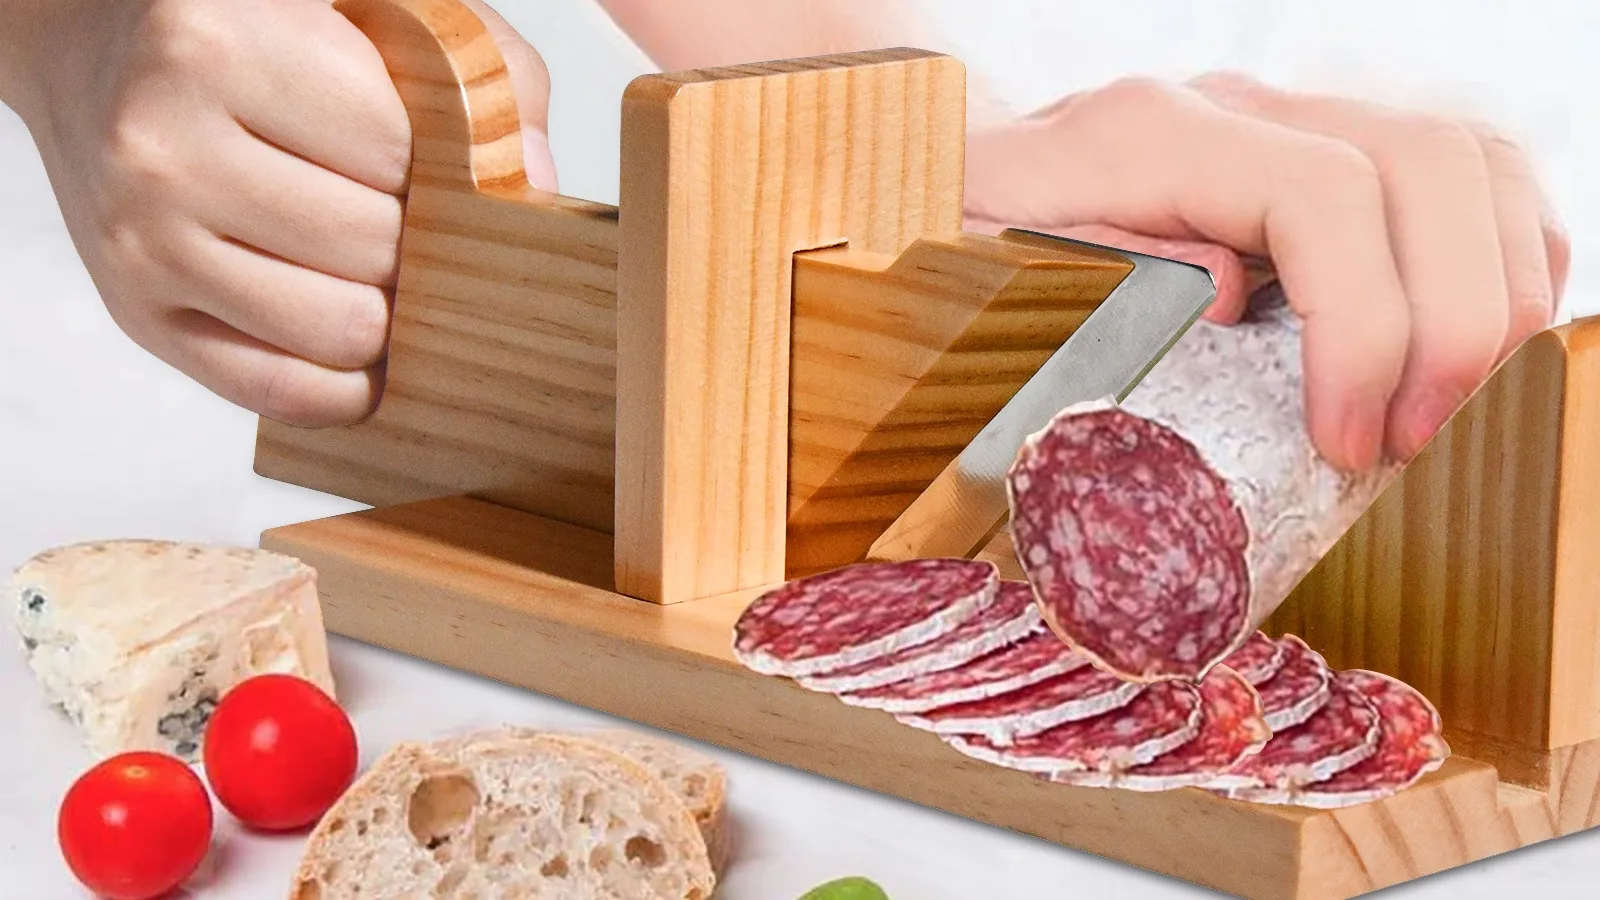 Sausage cutter CHIUSING Premium Sausage Salami Guillotine Slicer- Rustic  Wooden Design & Sharp Stainless Steel Blade For Slicing Chorizo, Pepperoni  & More Dried Meat Delicacies with child saft lock : : Home